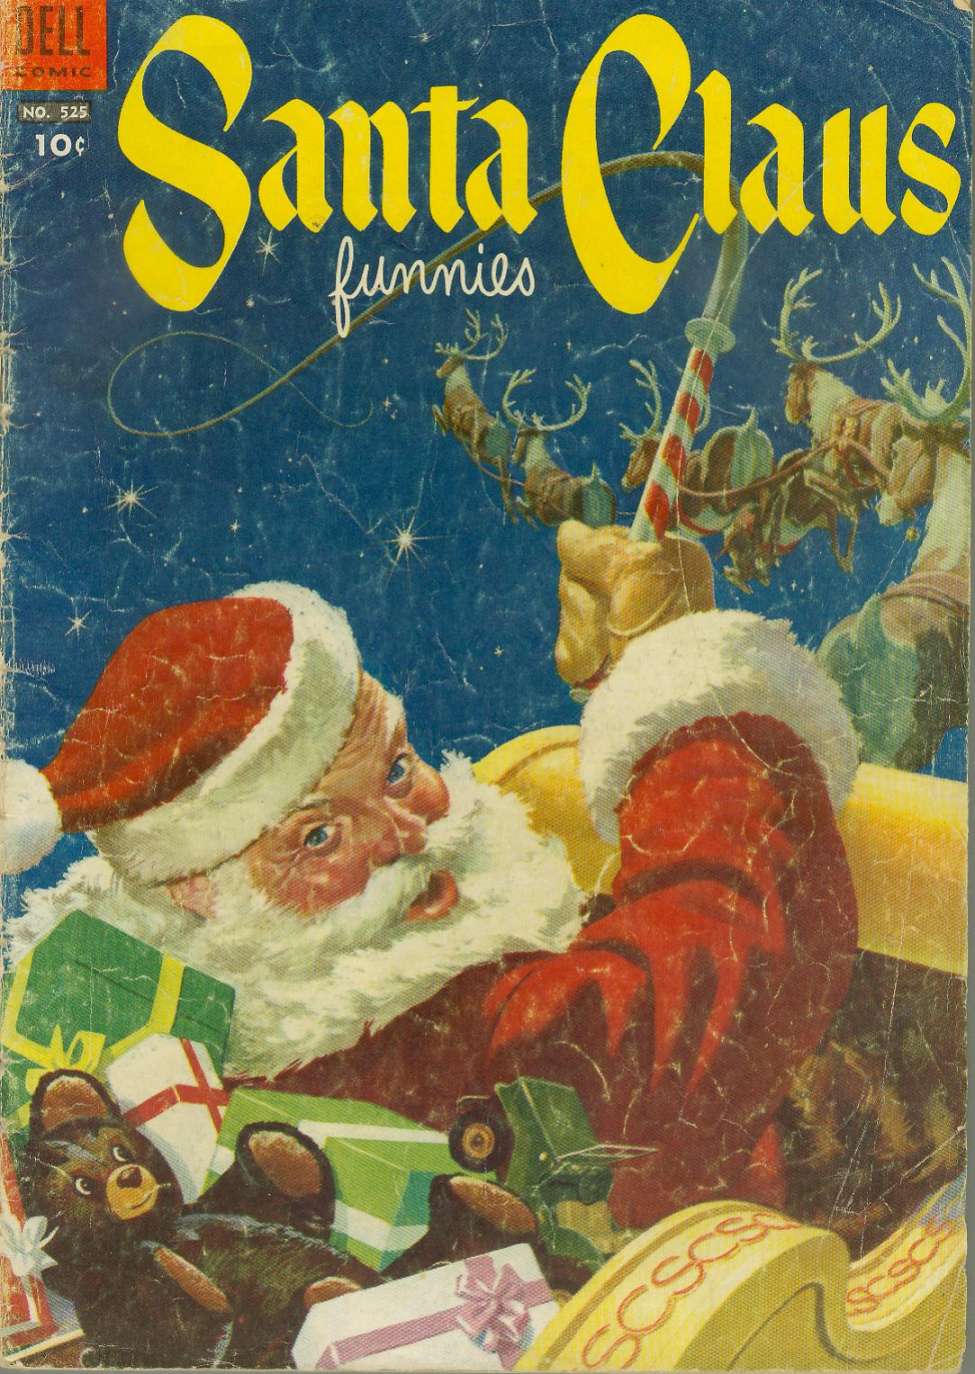 Book Cover For 0525 - Santa Claus Funnies